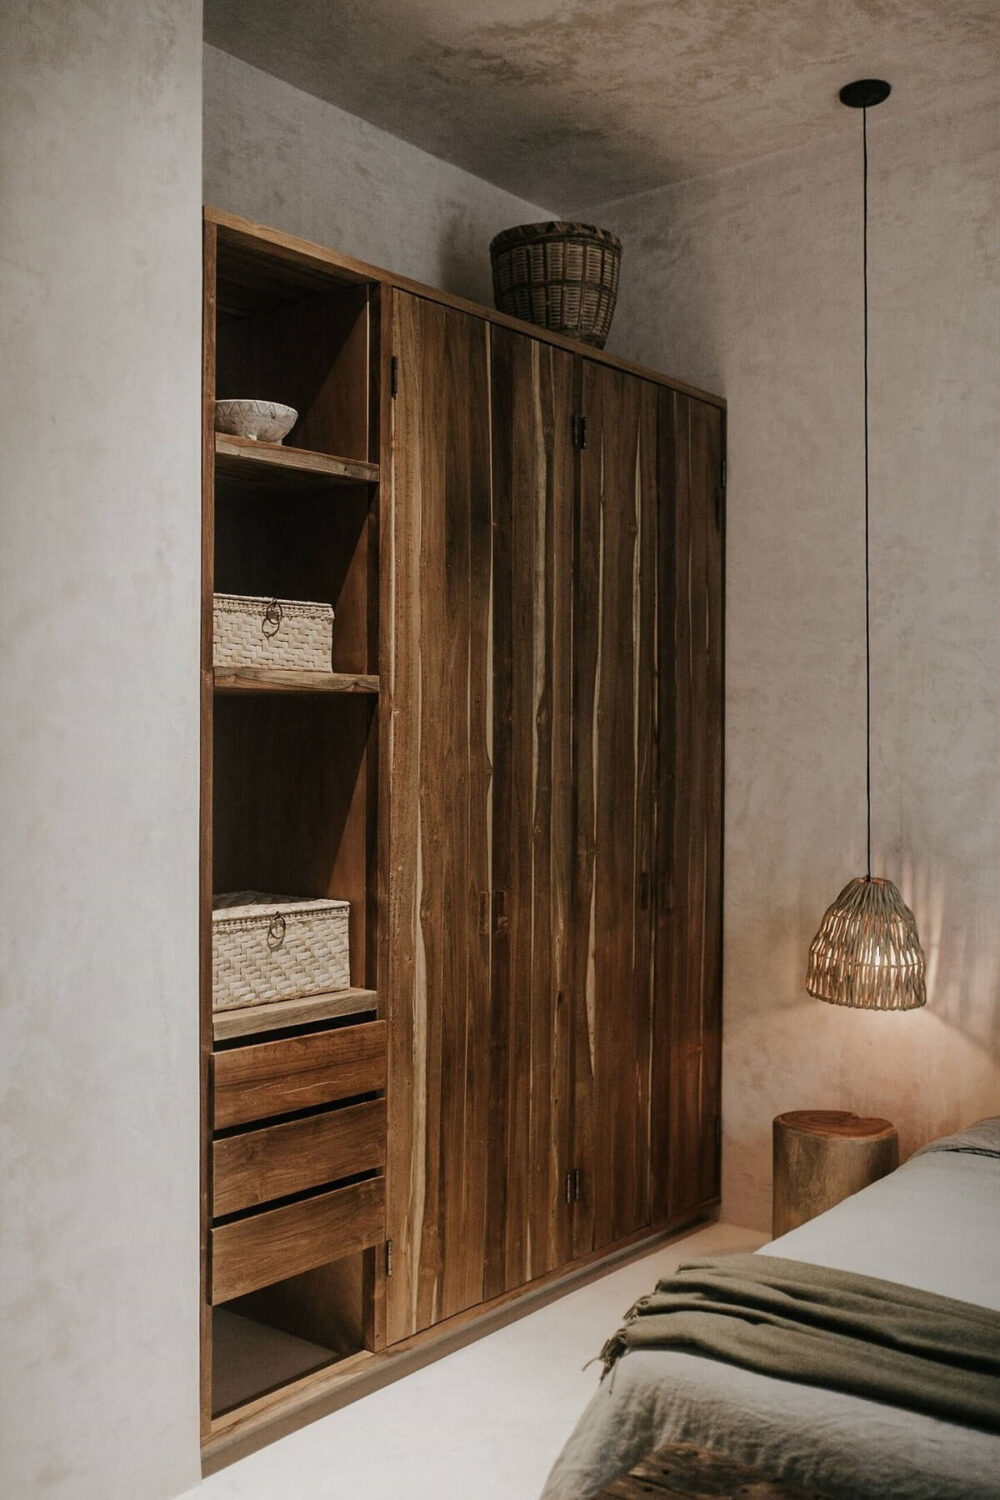 wooden-wardrobe-closed-and-open-storage-nordroom